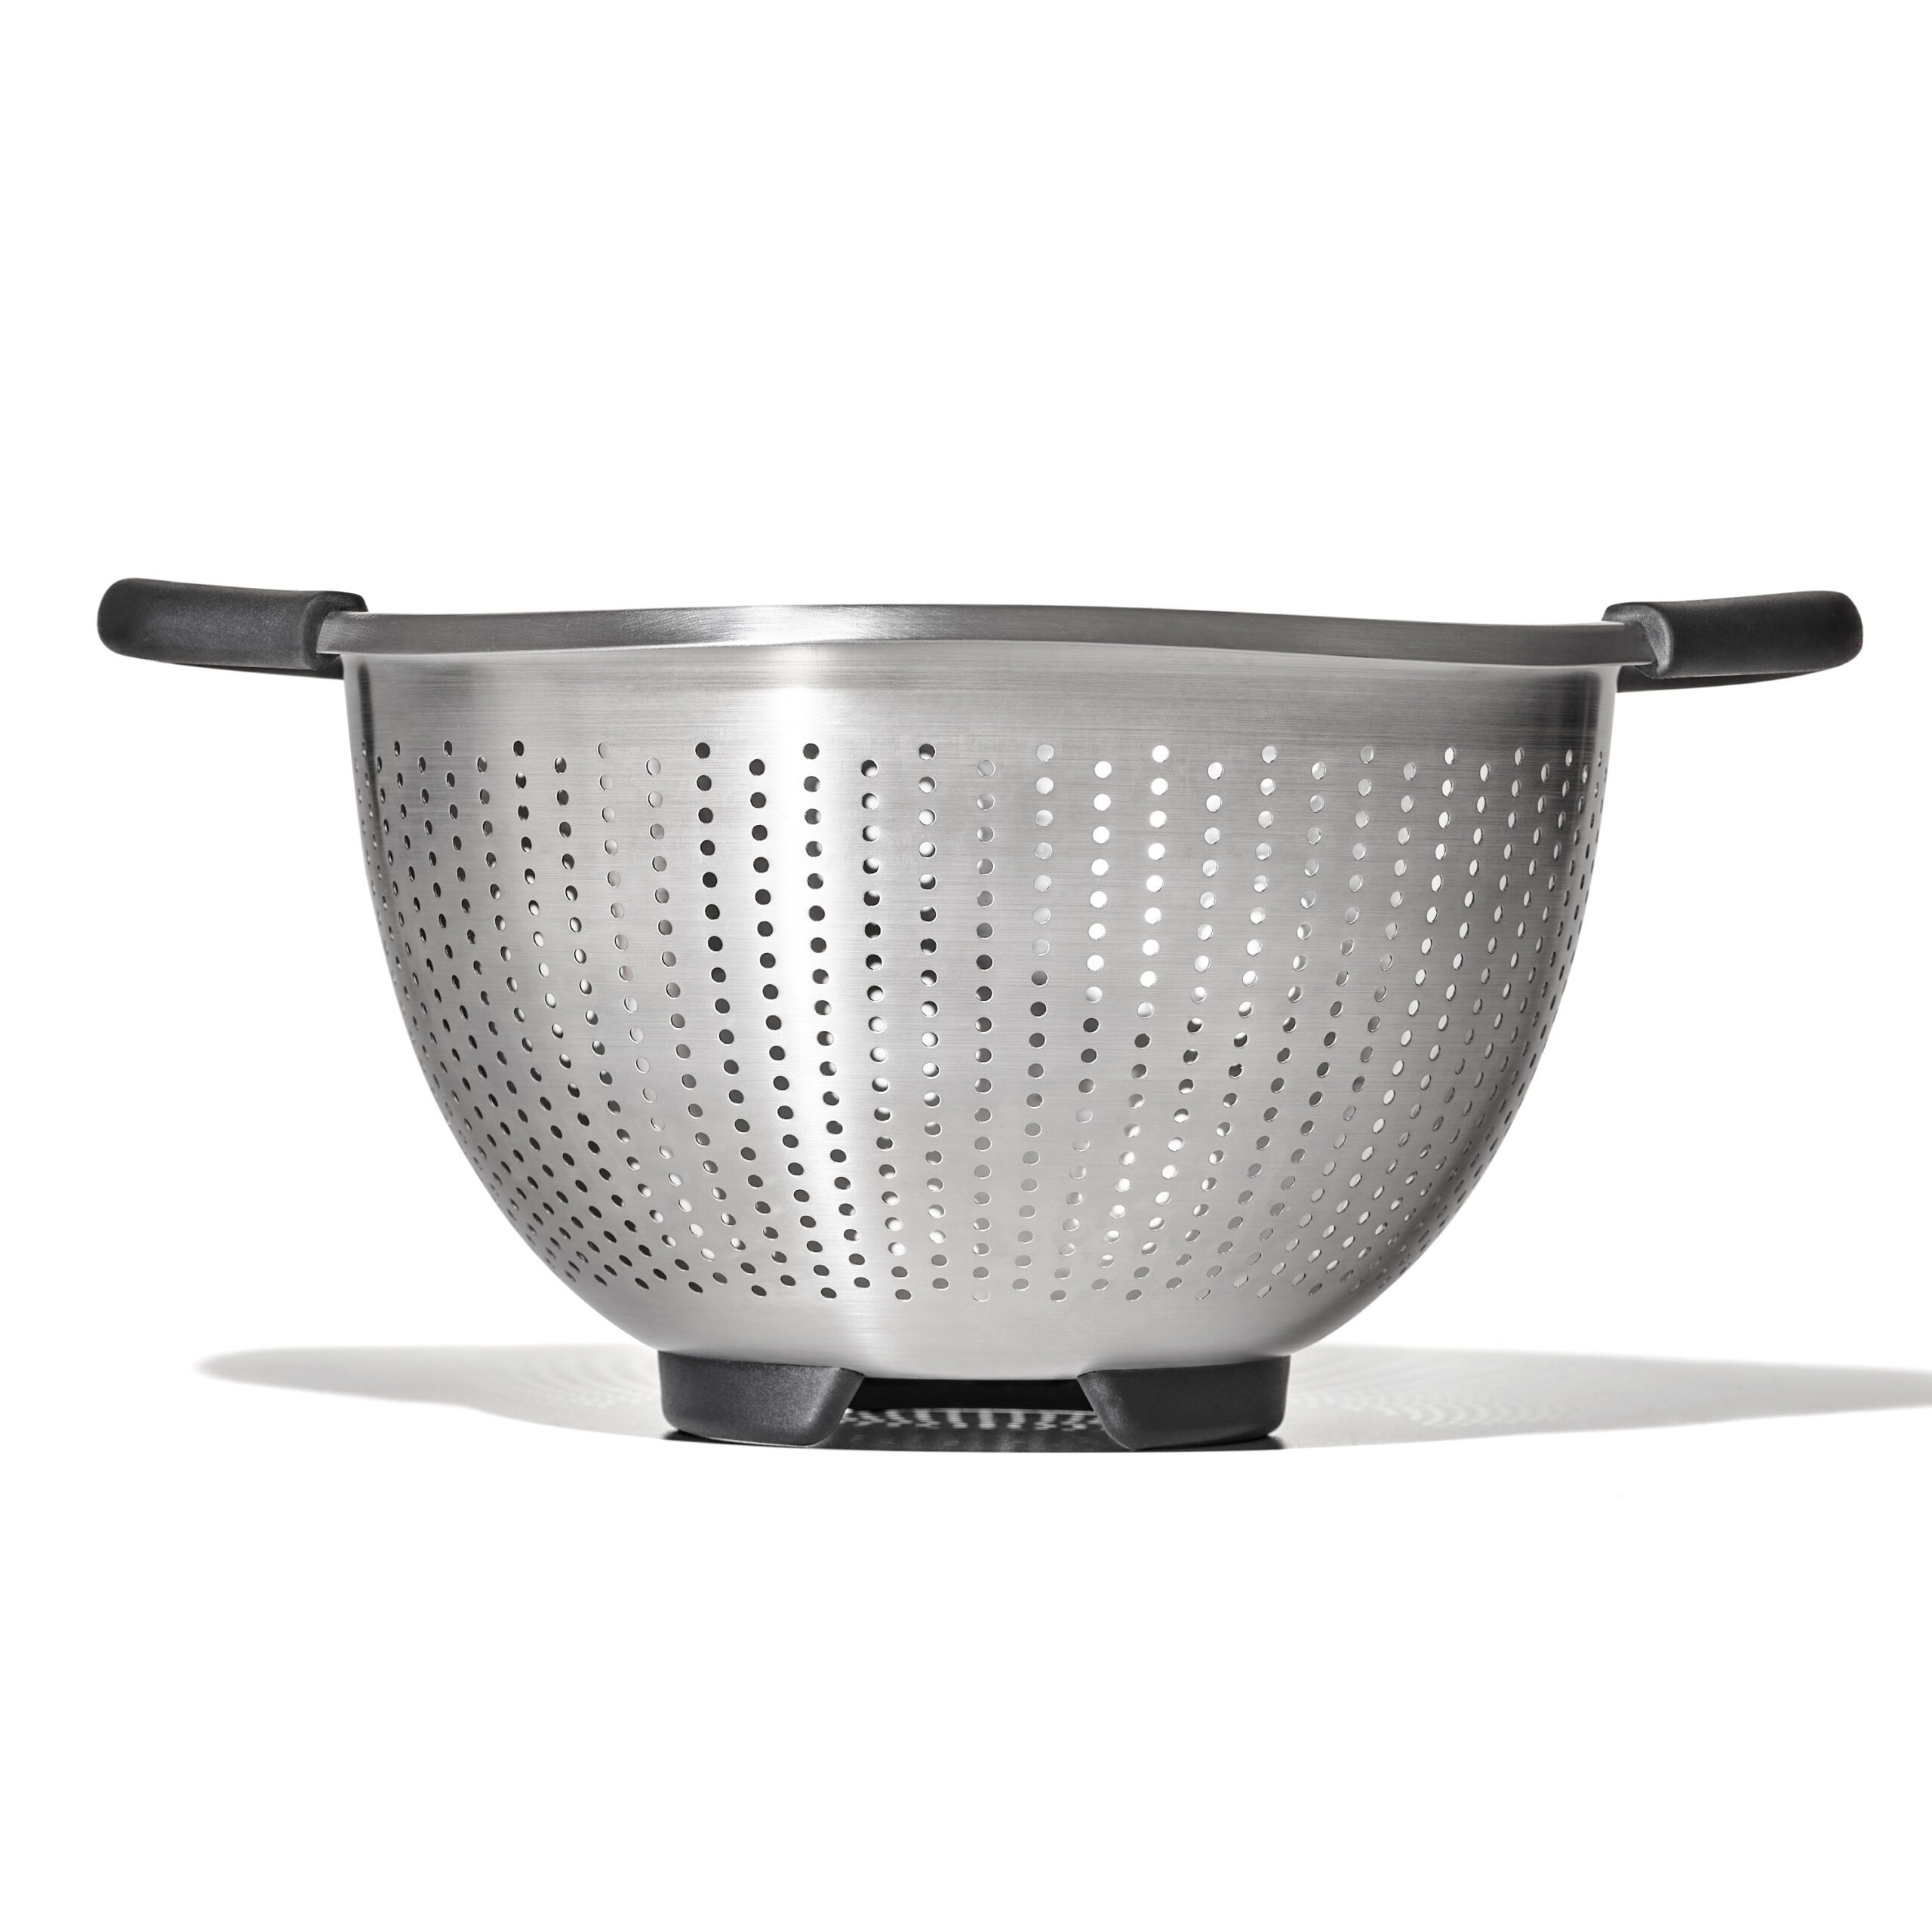 https://www.oxouk.com/wp-content/uploads/GG_11330800_StainlessSteelColander3qt_PDP_01-scaled.jpg